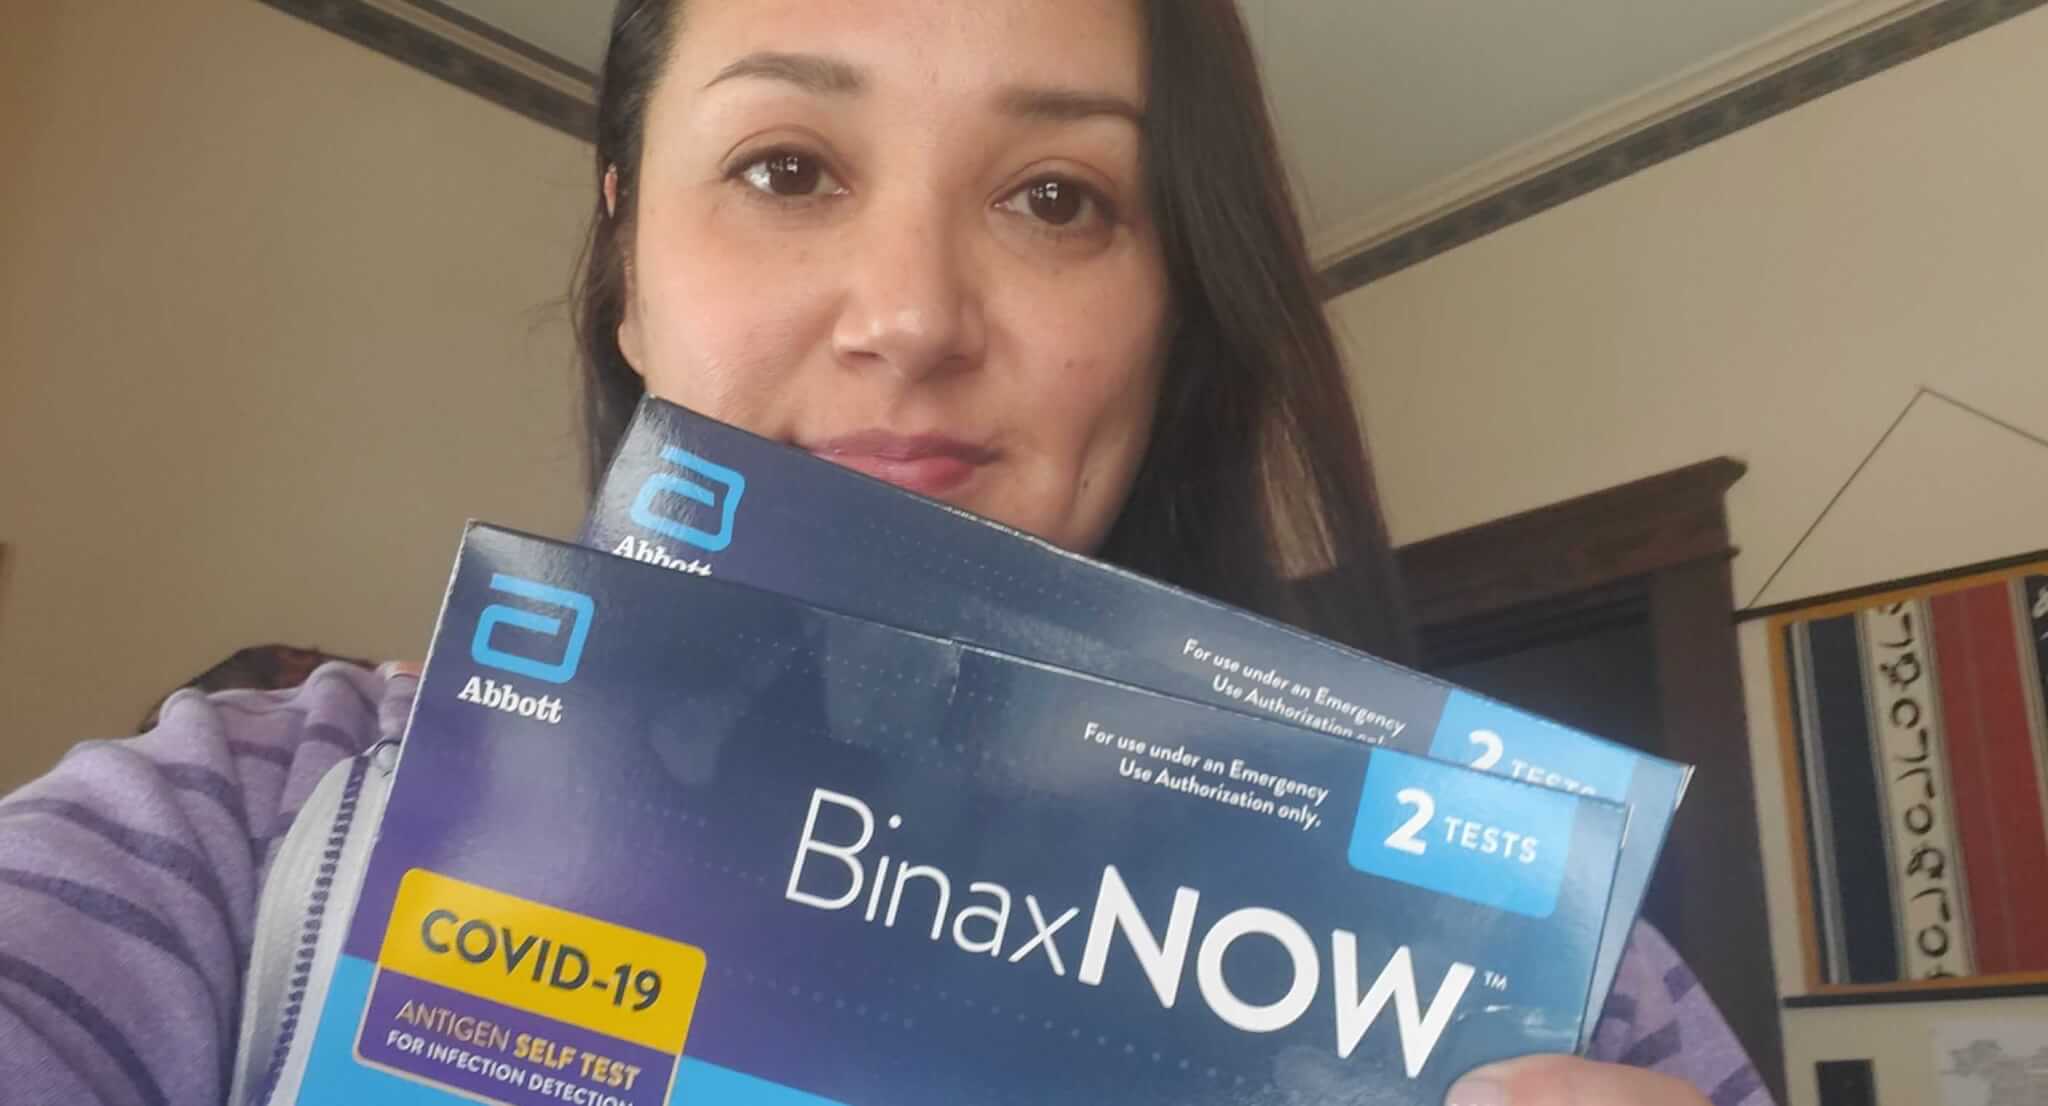 The Copper Courier's Araceli Cruz holding the COVID-19 rapid tests she received in the mail.